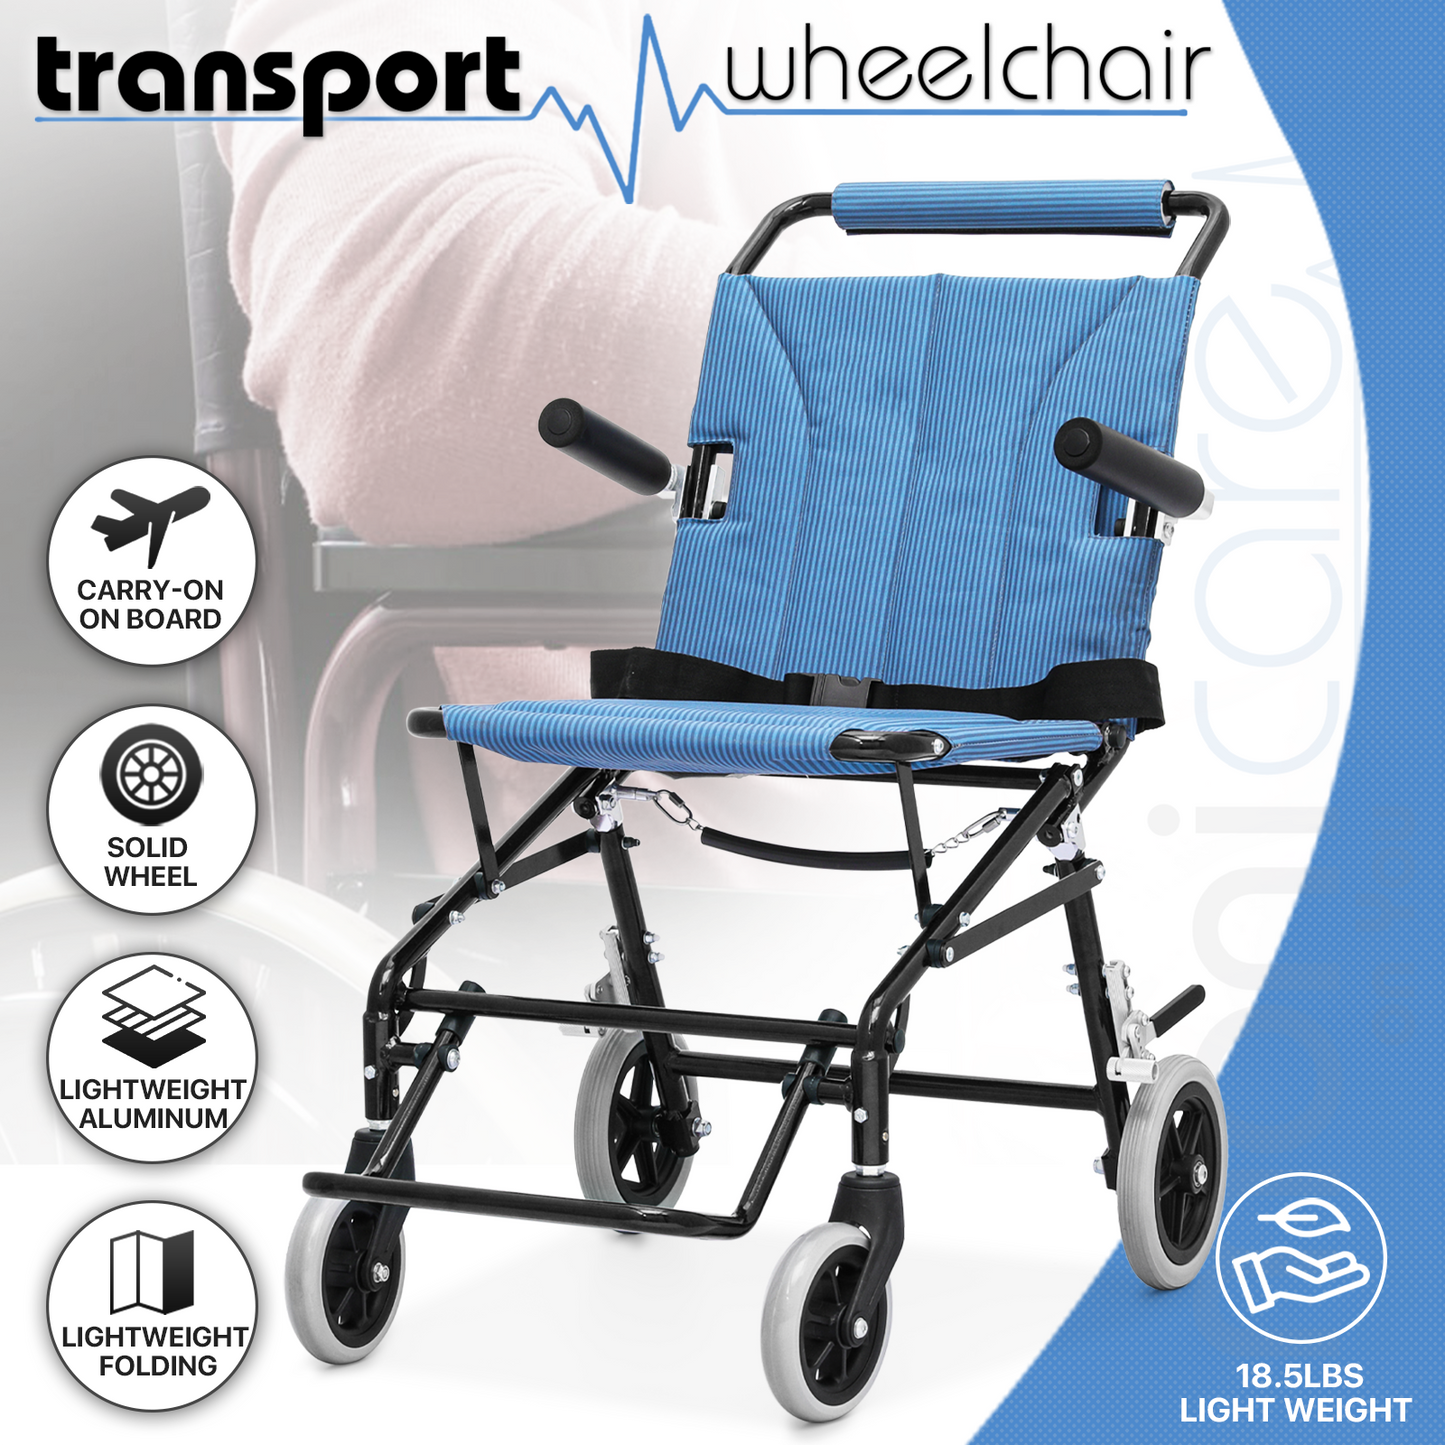 Transport Wheelchair - Black - Can Be Carry-on Plane